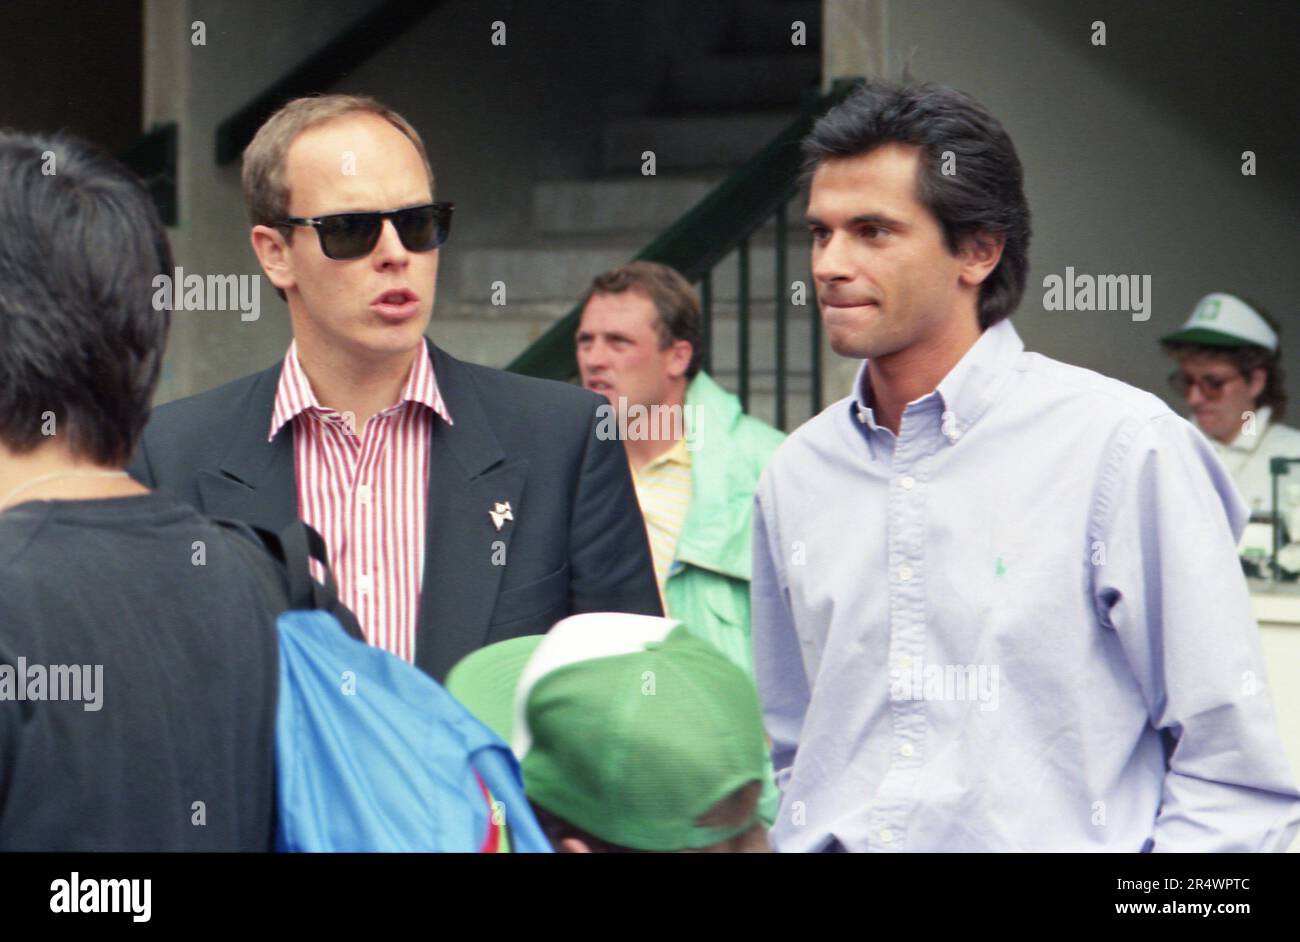 Prince Albert of Monaco and Jean-Yves Le Fur arriving in the stands of the French Open in June 1990. Stock Photo